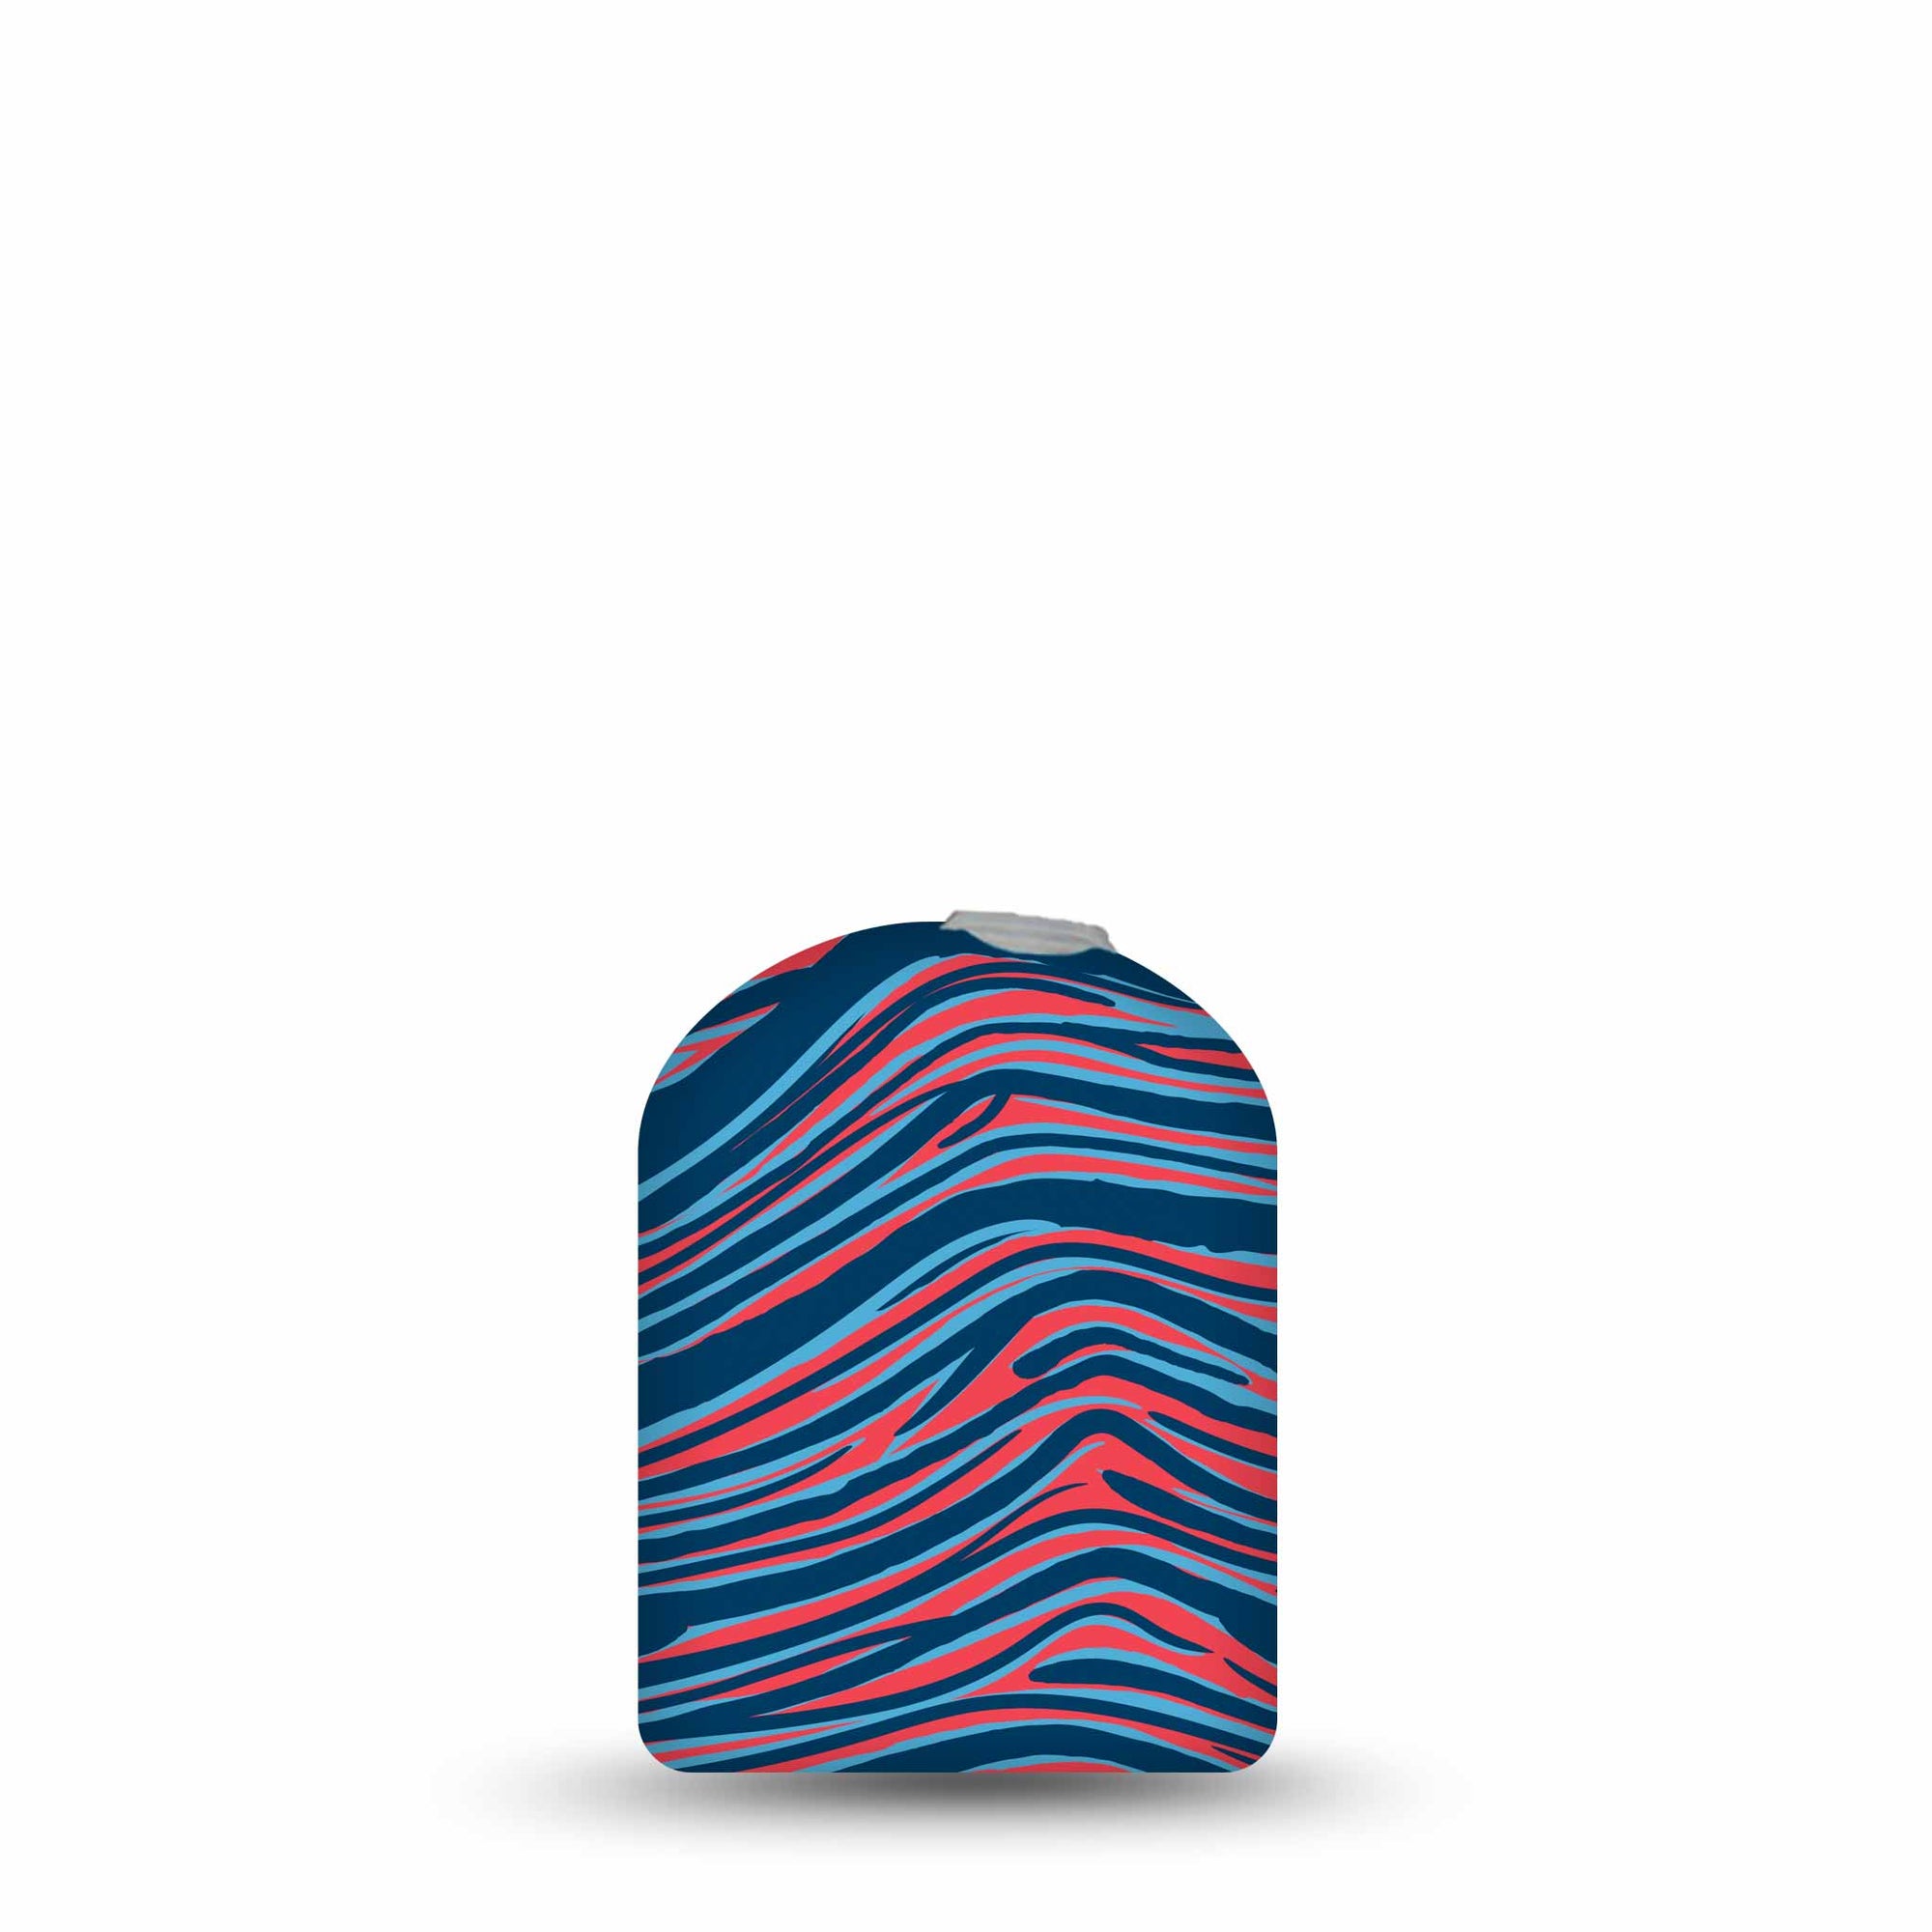 ExpressionMed Navy Blue, Red, and Light Blue Titans Team Spirit Omnipod Pump Sticker